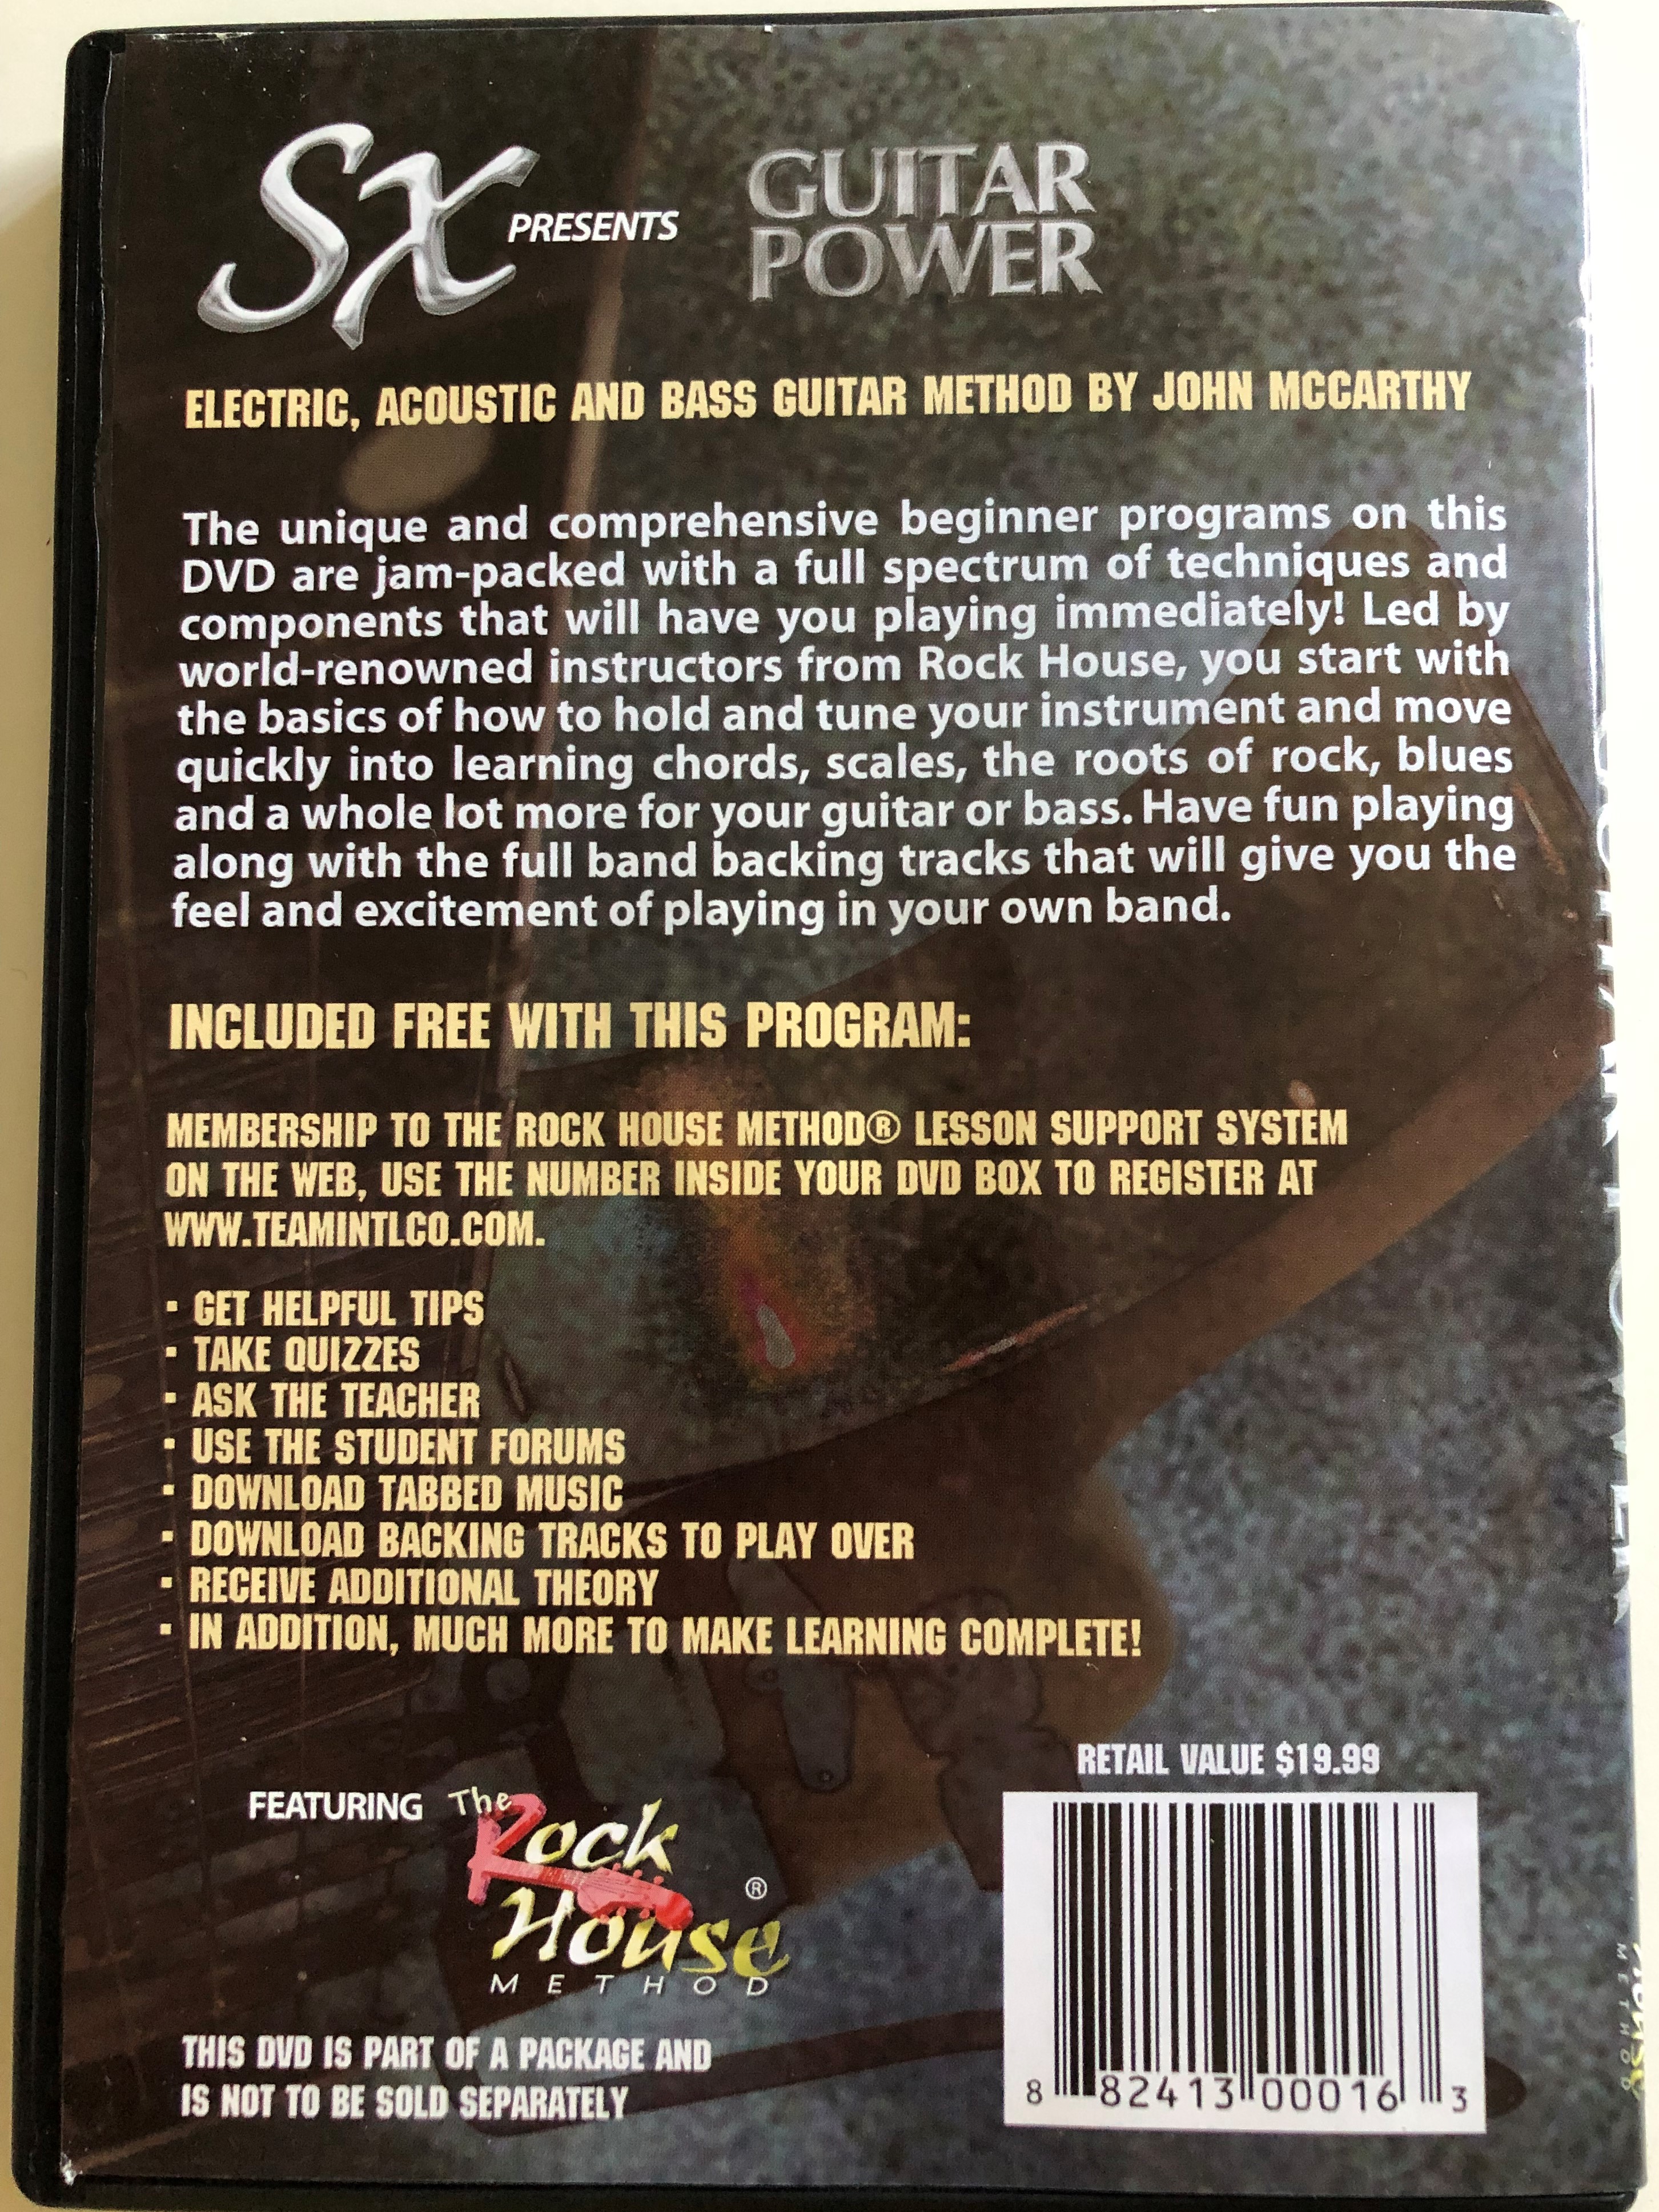 sx-presents-guitar-power-dvd-learn-to-play-electric-acoustic-bass-guitar-free-web-membership-for-lesson-support-featuring-the-rock-house-method-by-john-mccarthy-2-.jpg